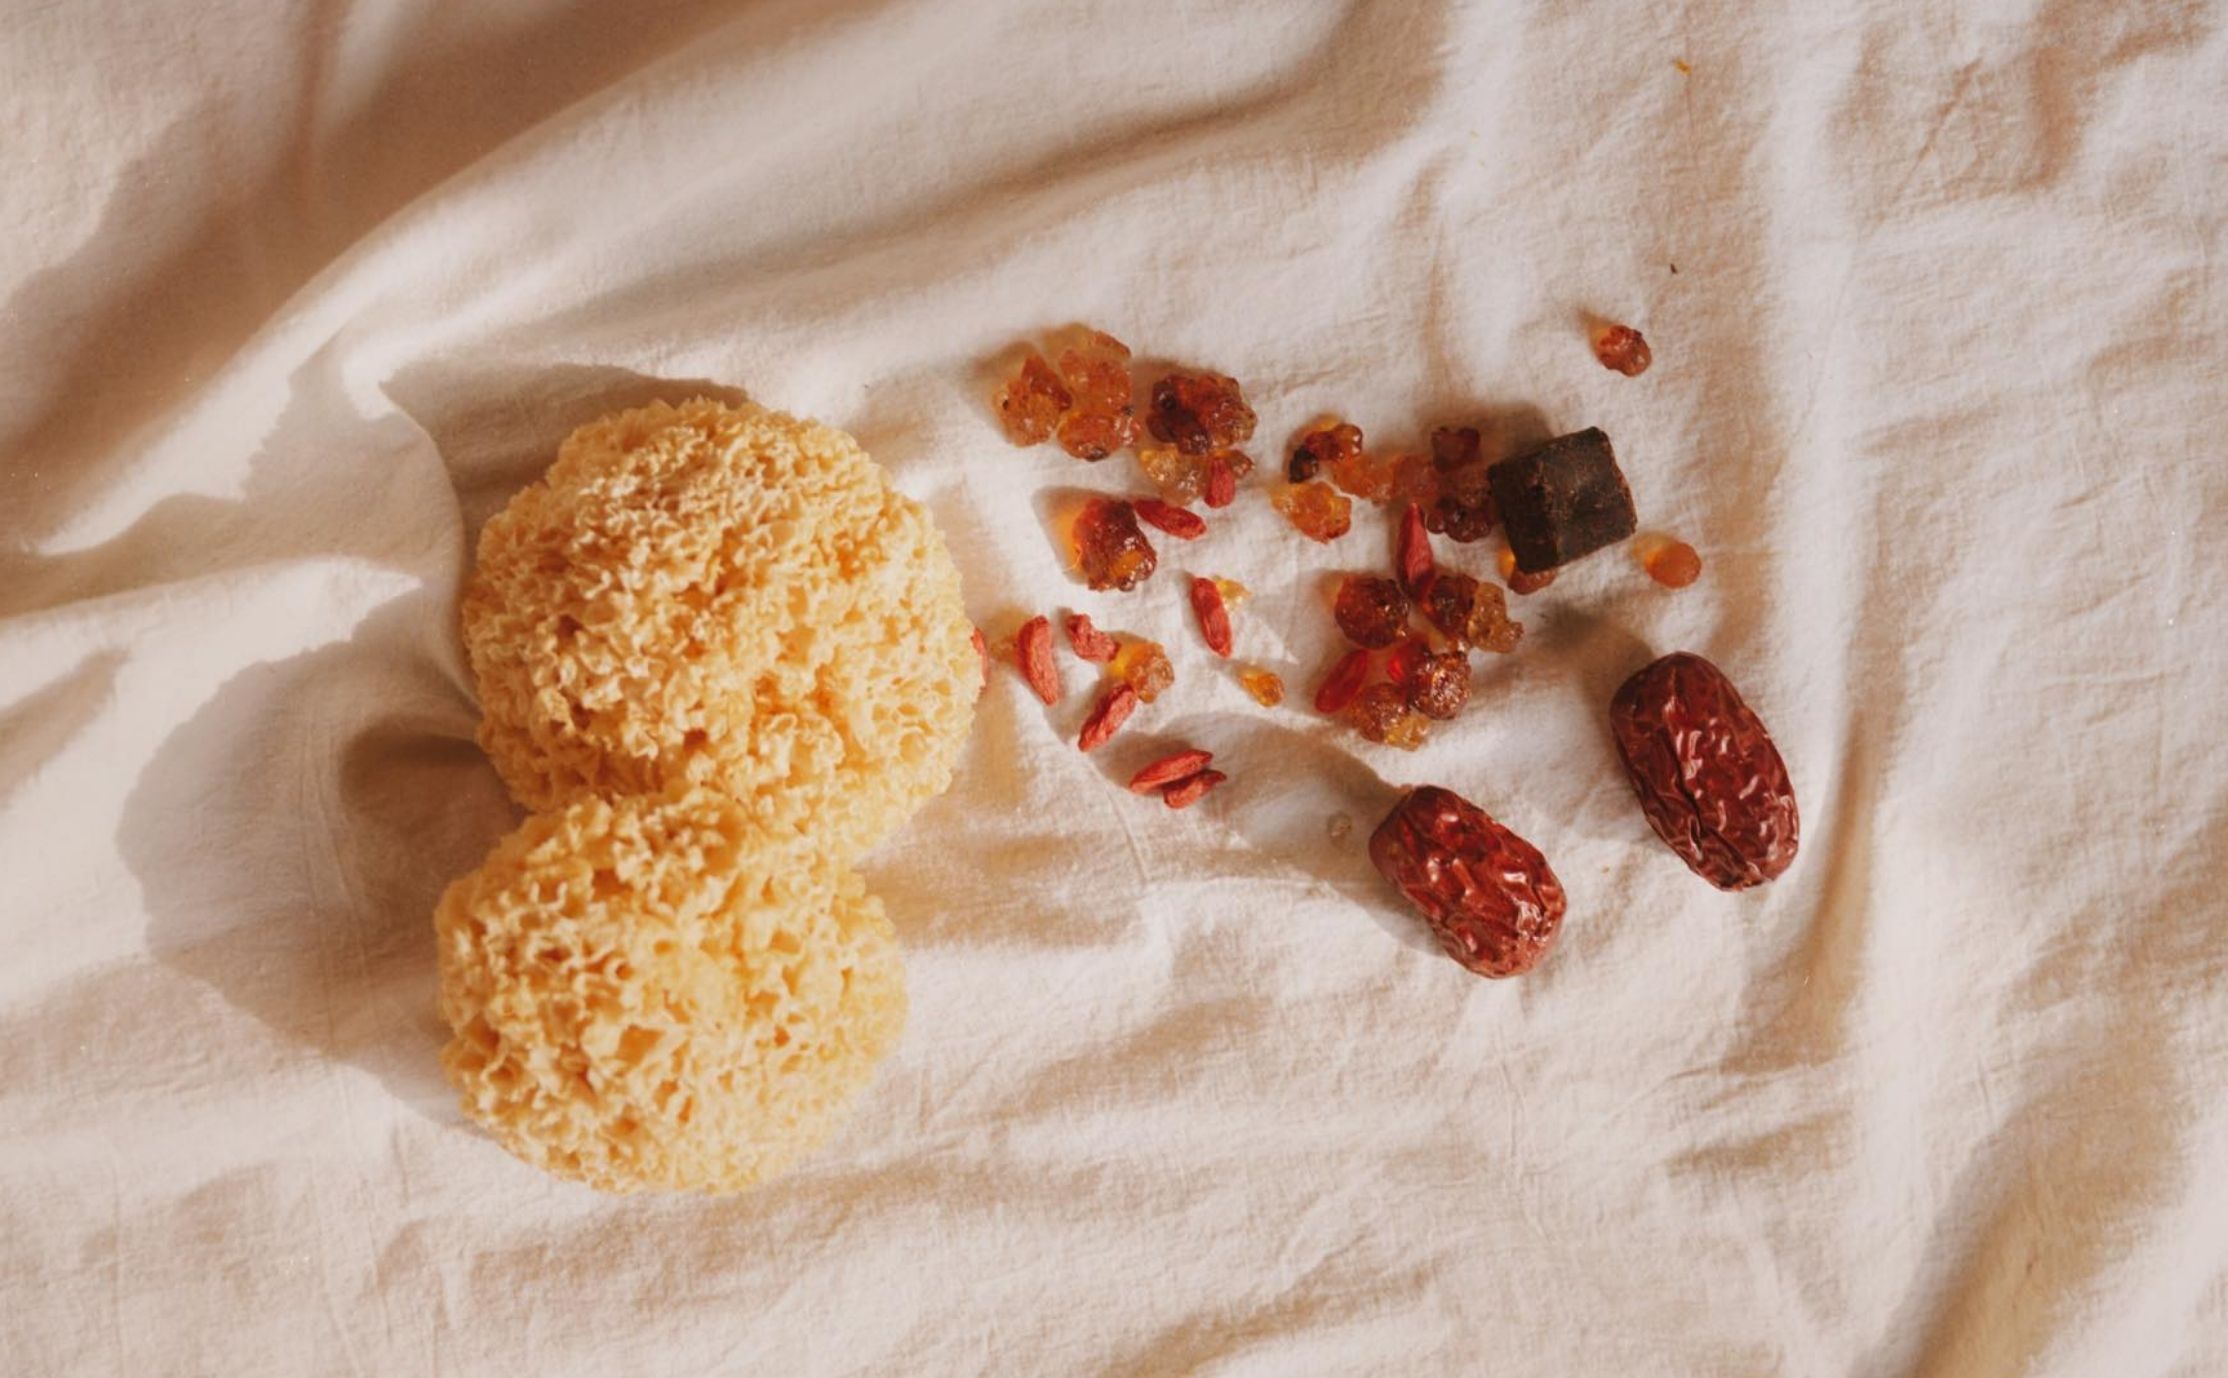 TCM ingredients on tablecloth, including snow fungus, red dates, and goji berries